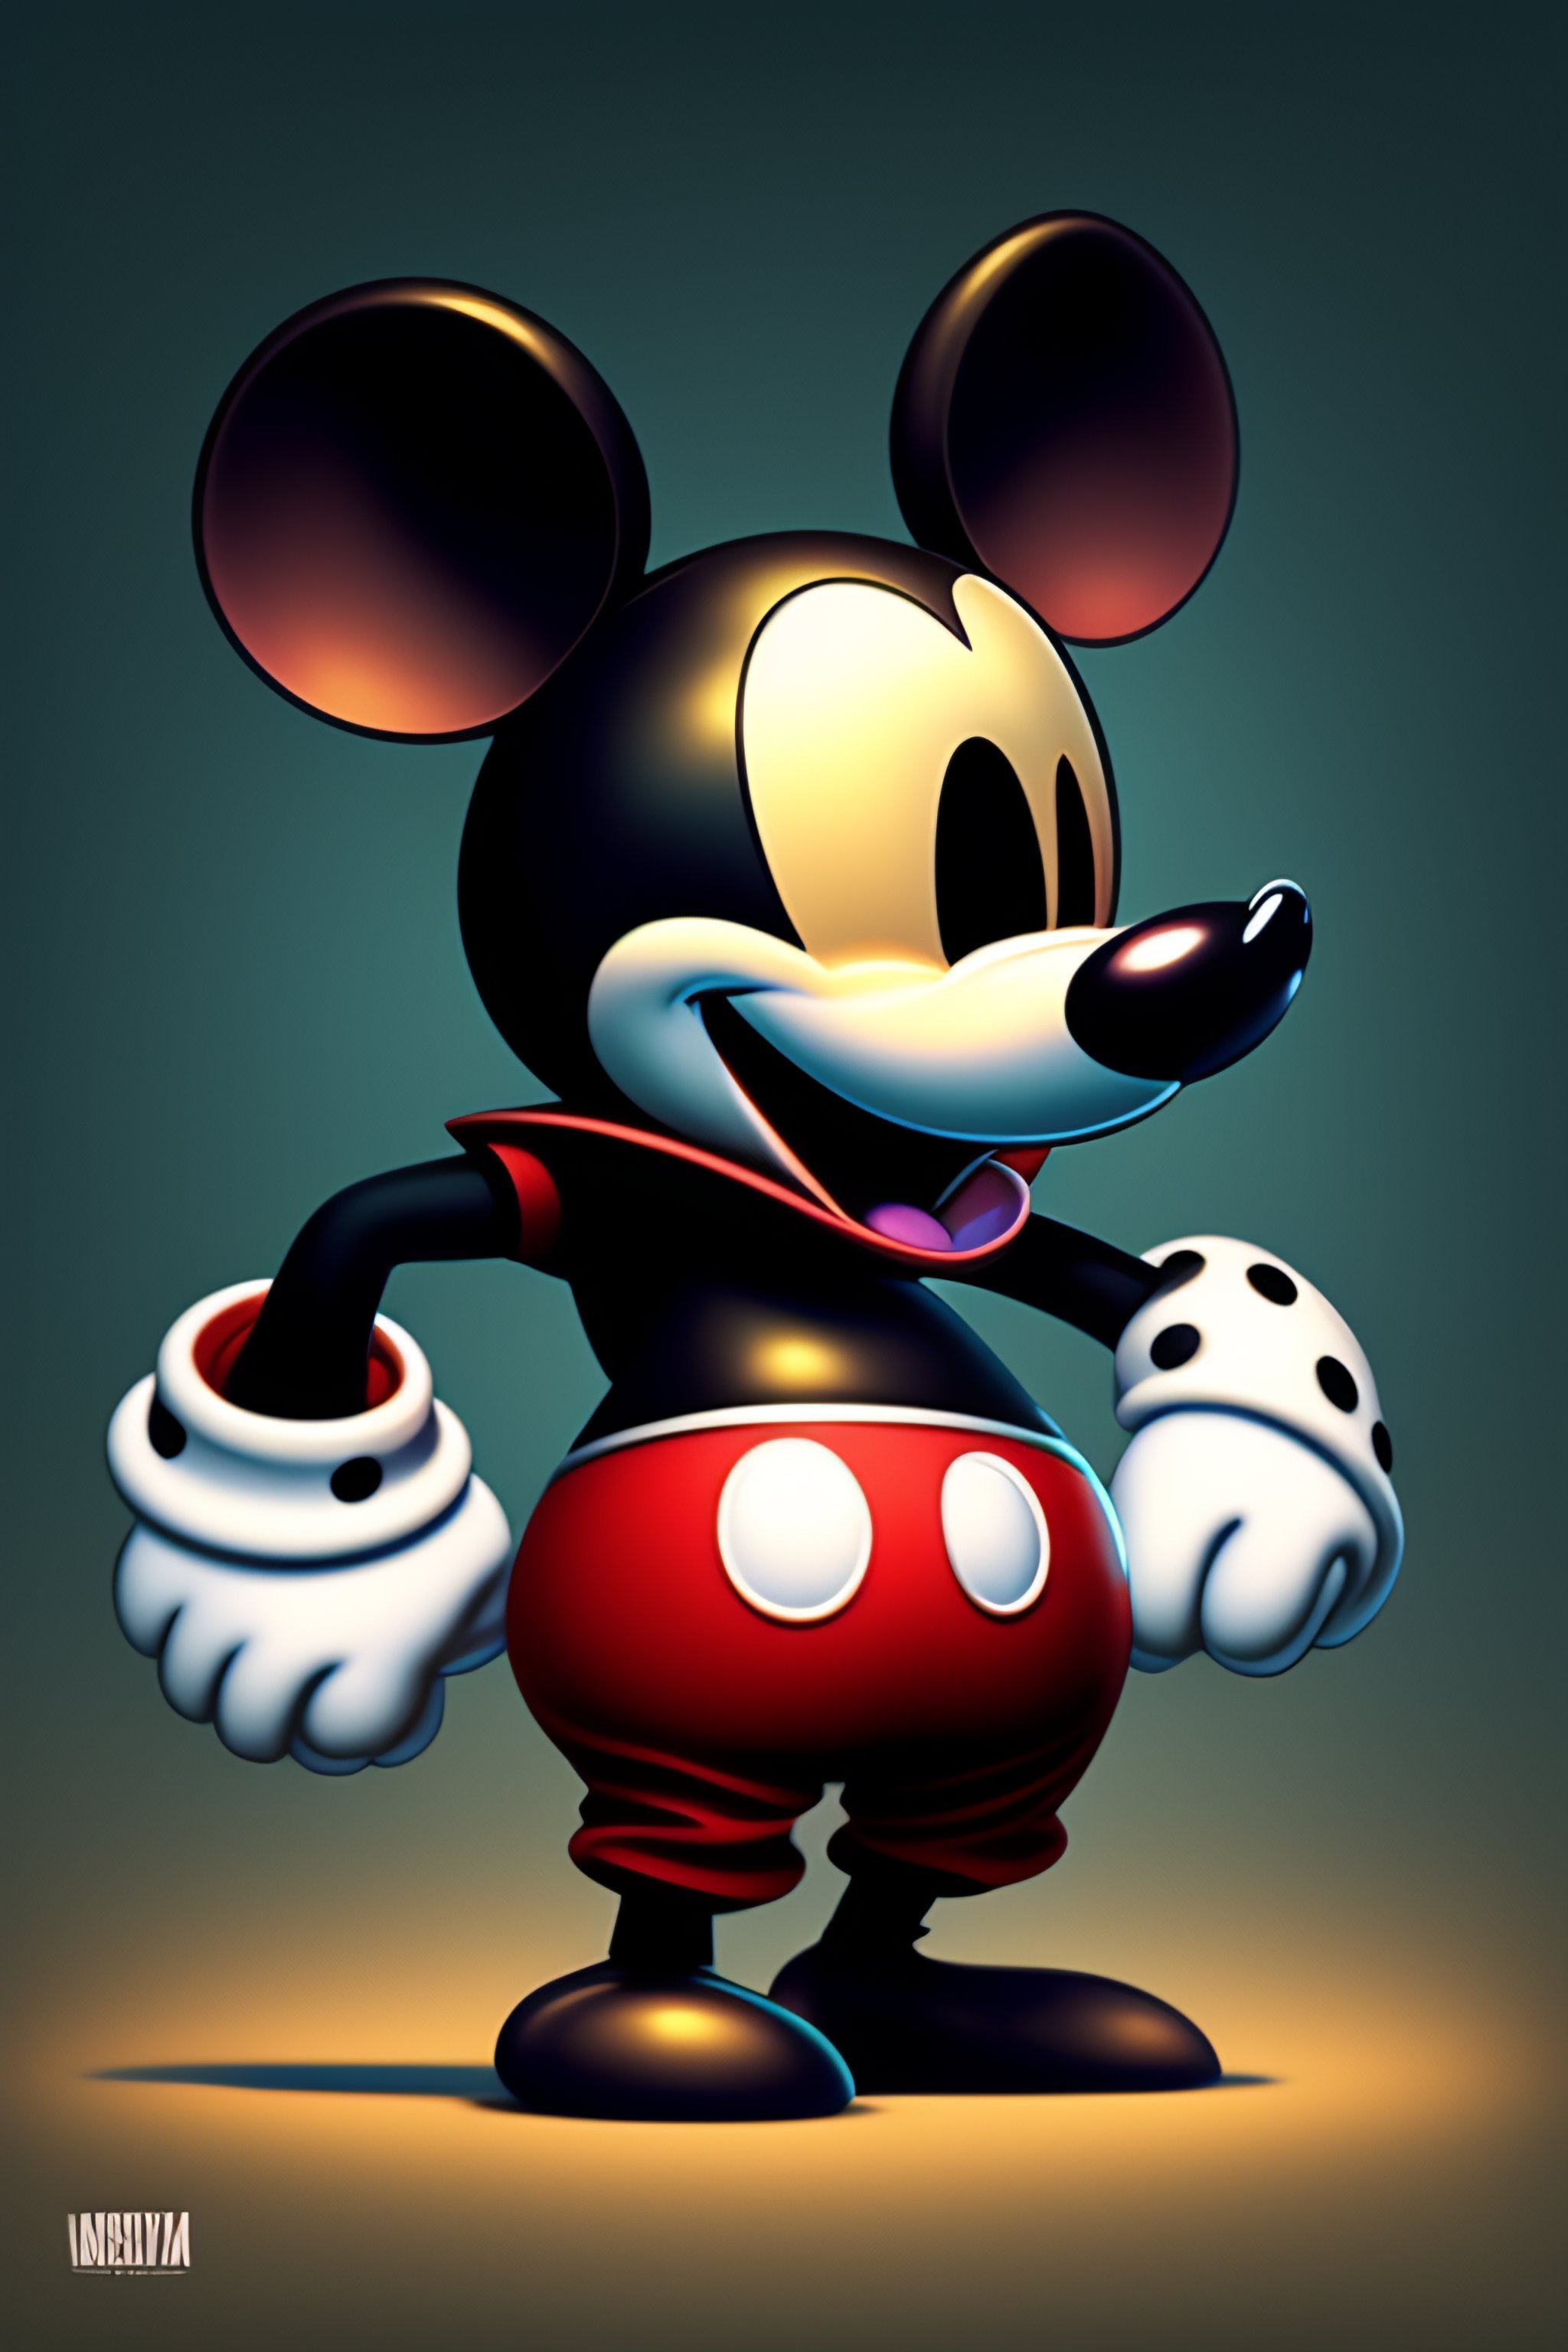 Evil mickey mouse